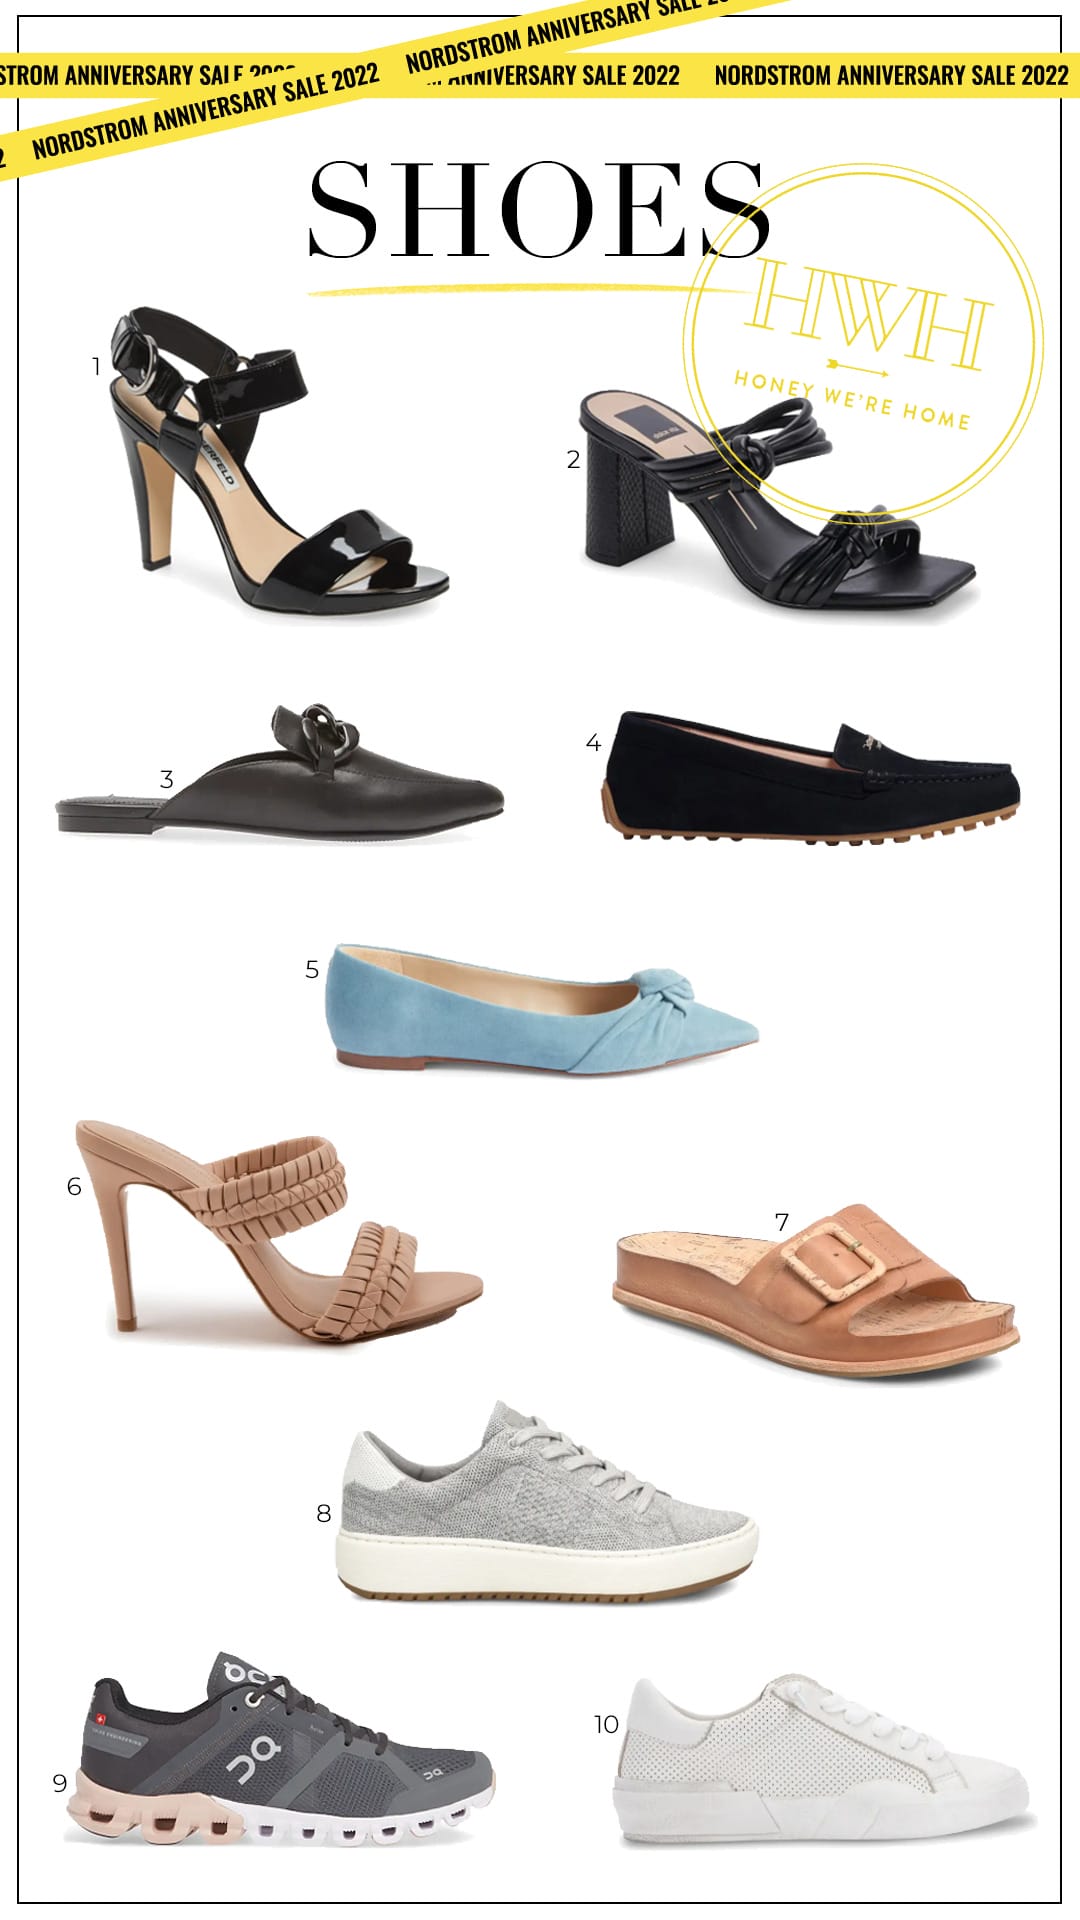 2022 Nordstrom Anniversary Sale Best Shoes